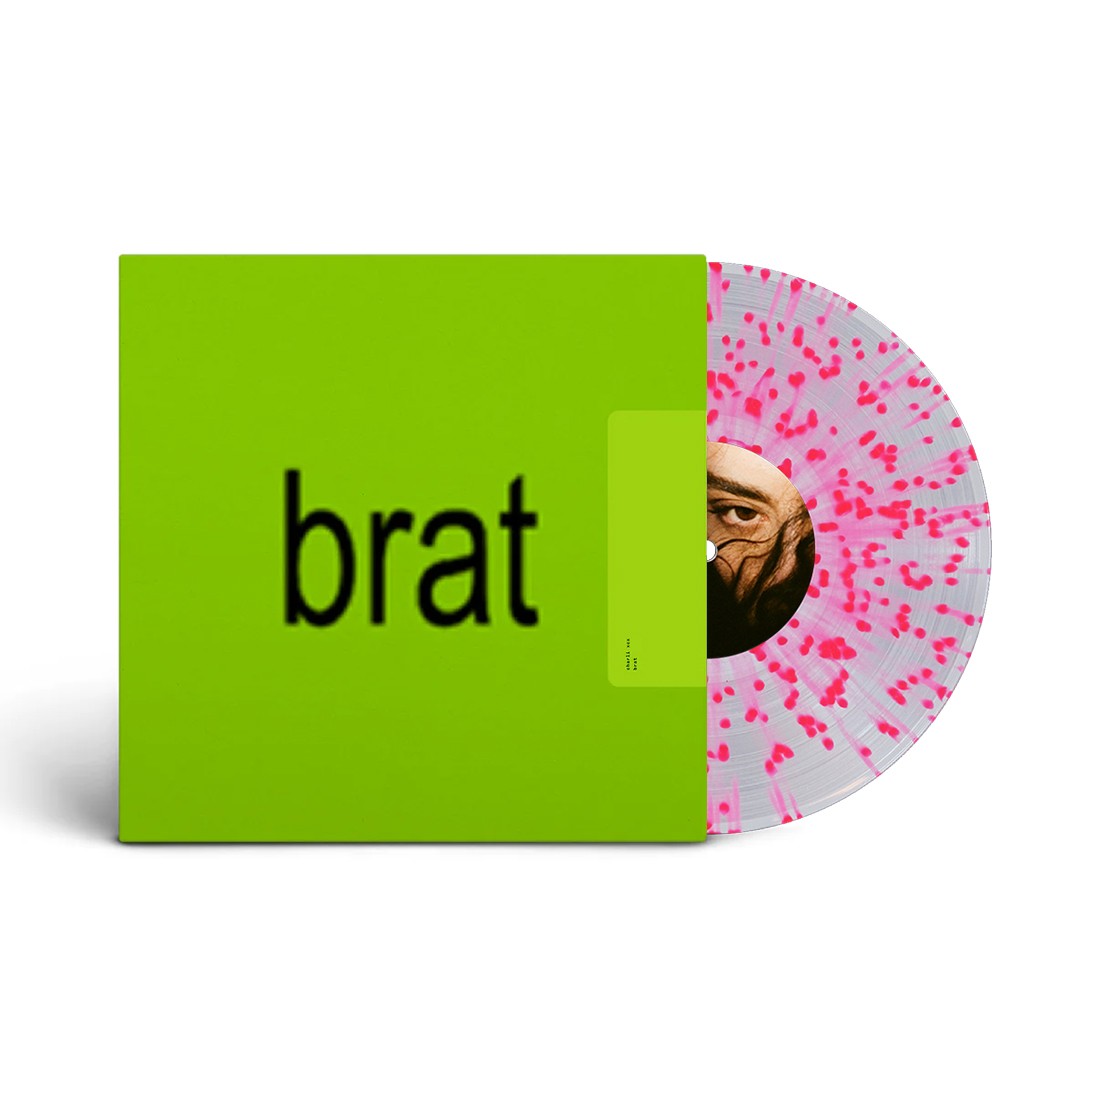 Brat is the new album by @charli_xcx Released 7th June by @AtlanticRecords we have the clear/pink splatter vinyl LP and the translucent black vinyl LP available to pre-order here: vinyltap.co.uk/search/result/…